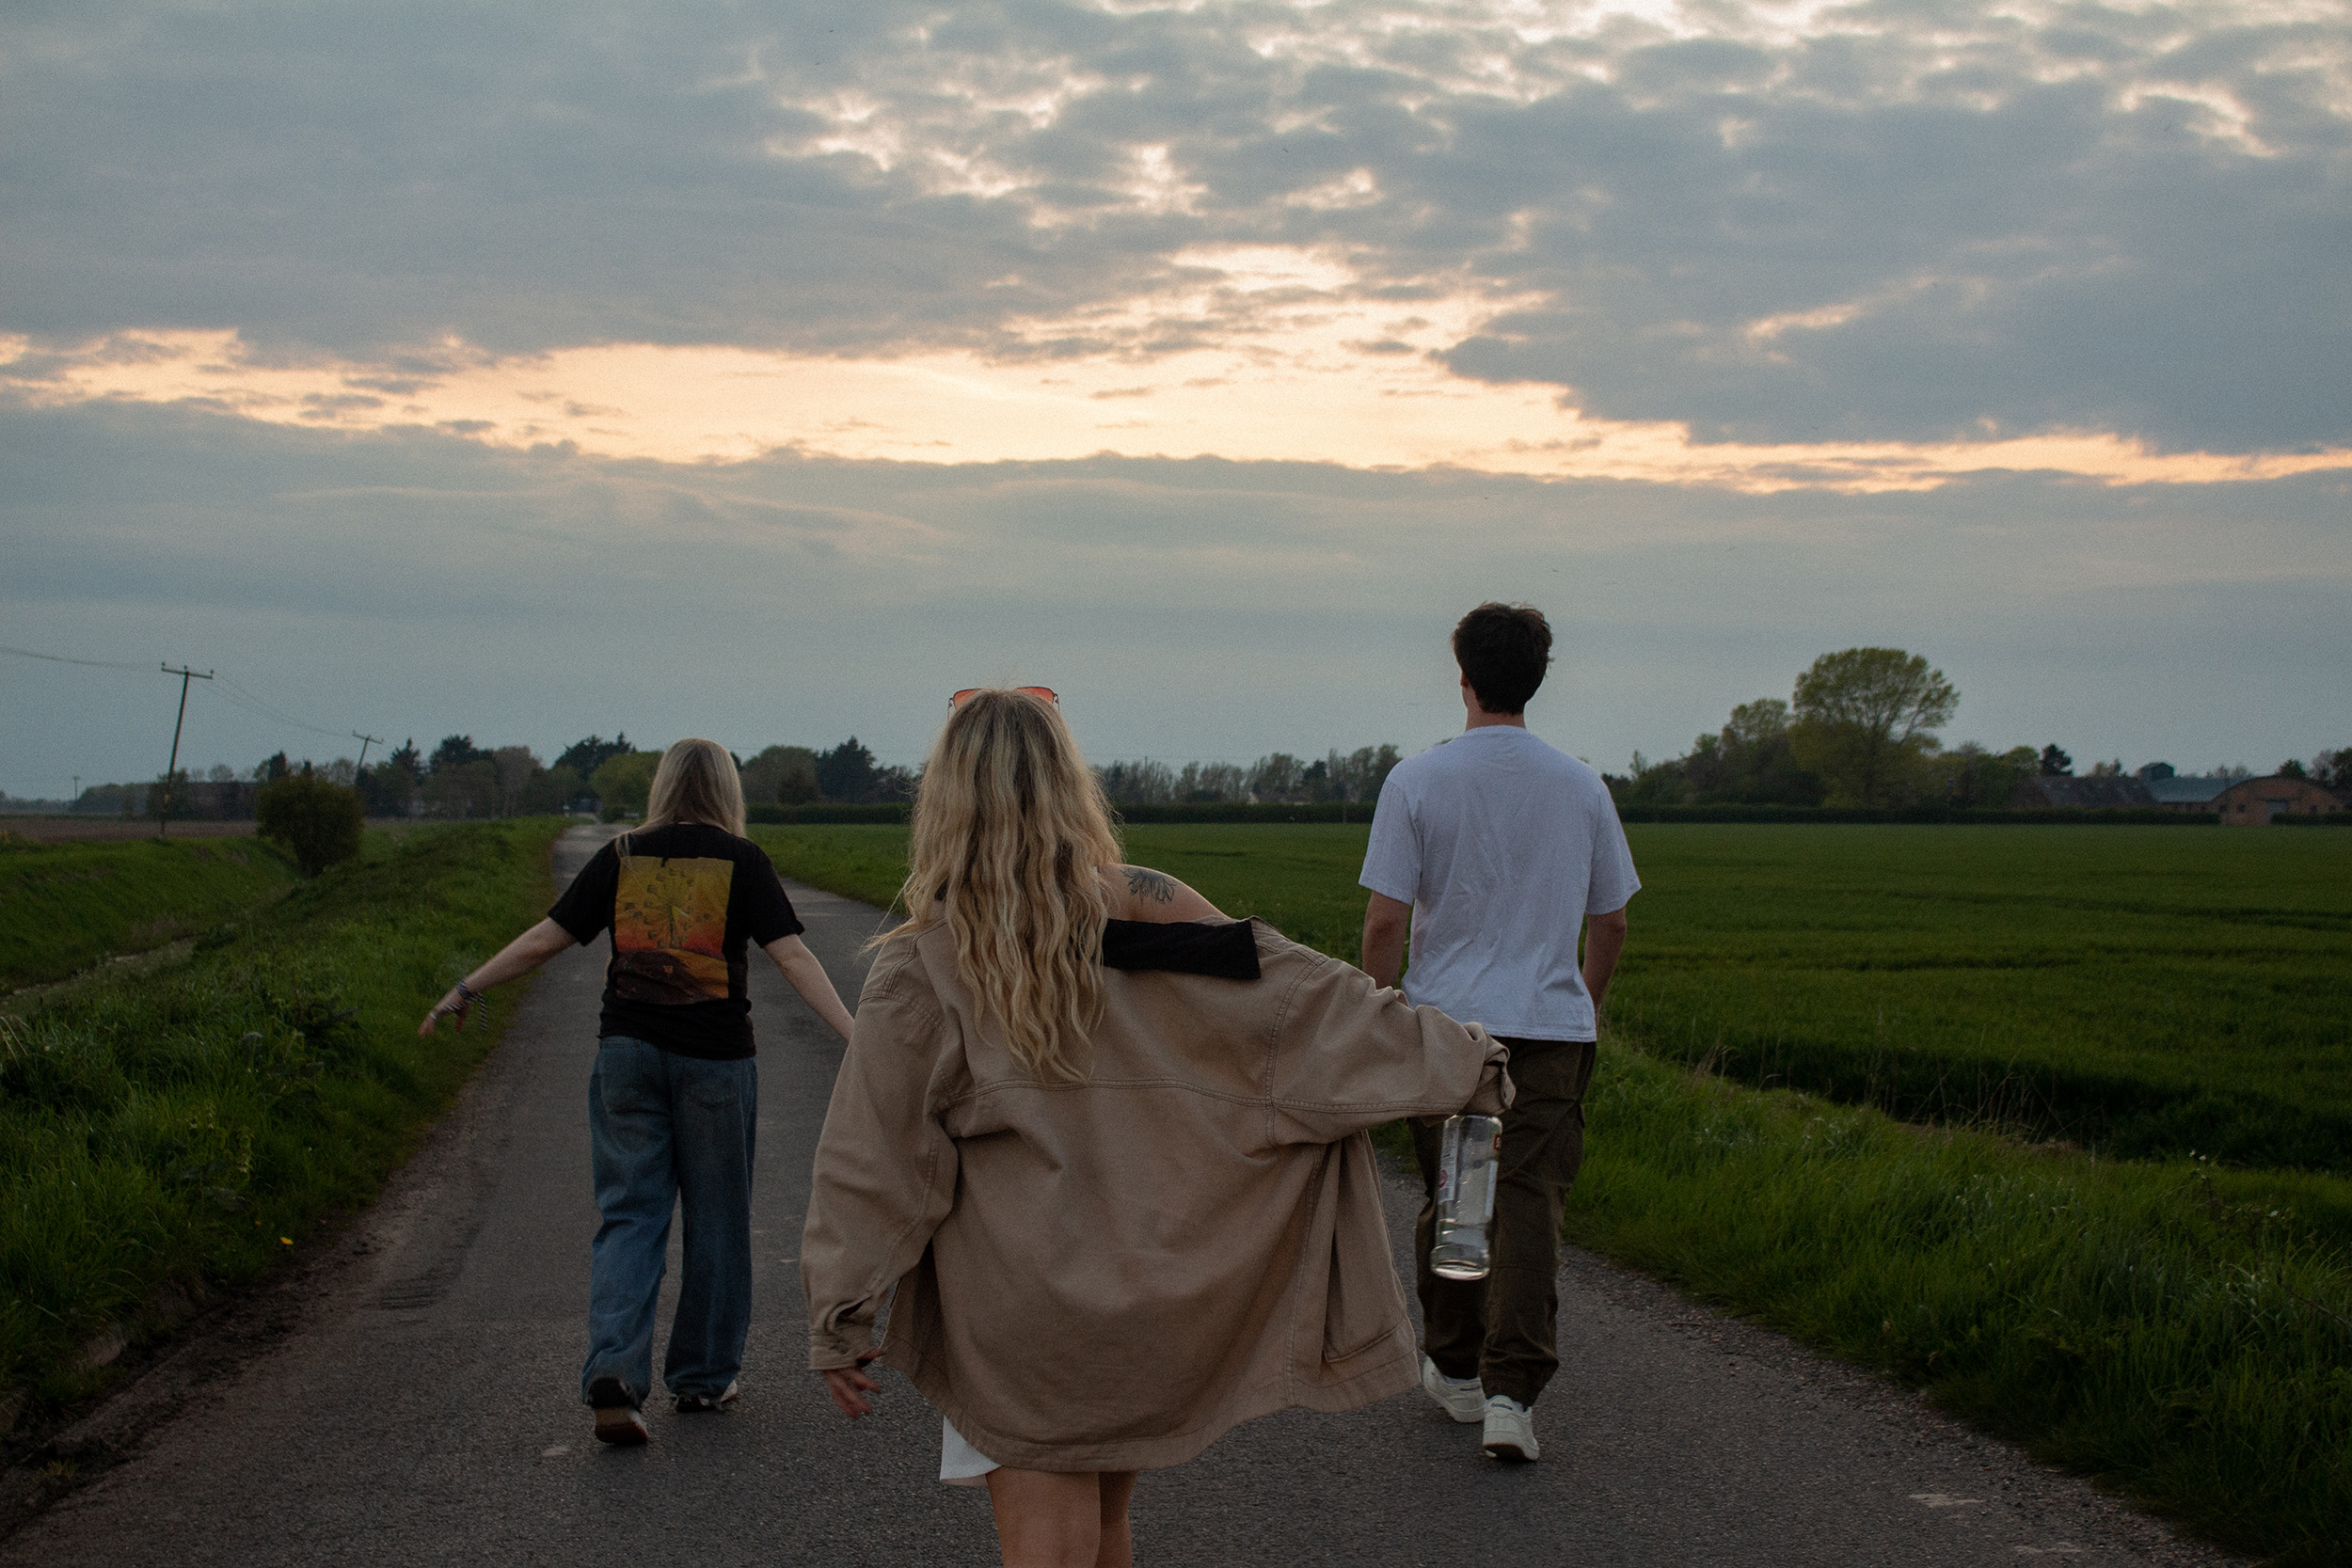 Photography, Styling and Direction by Ellie Parnham of three models walking away from camera on country road by fields.